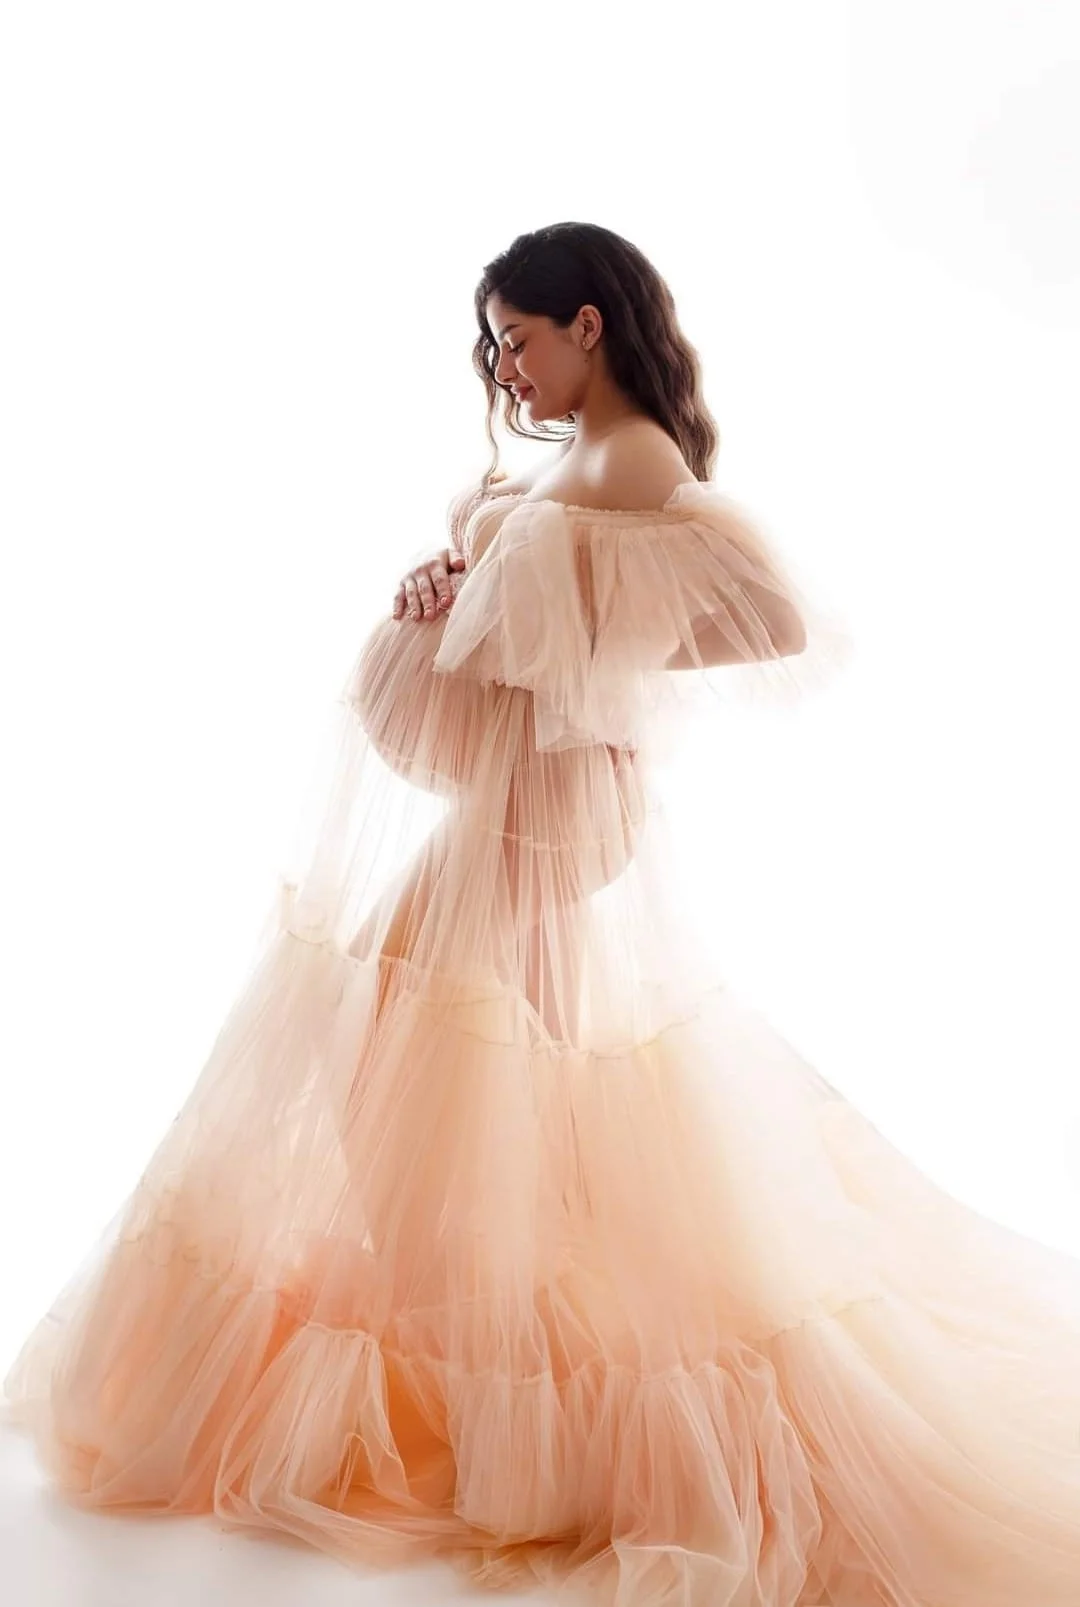 

Illusion Sheer Maternity Dress for Photoshoot Off The Shoulder Full Sleeves Gala Robes for Pregnancy Tulle Babyshower Vestidos